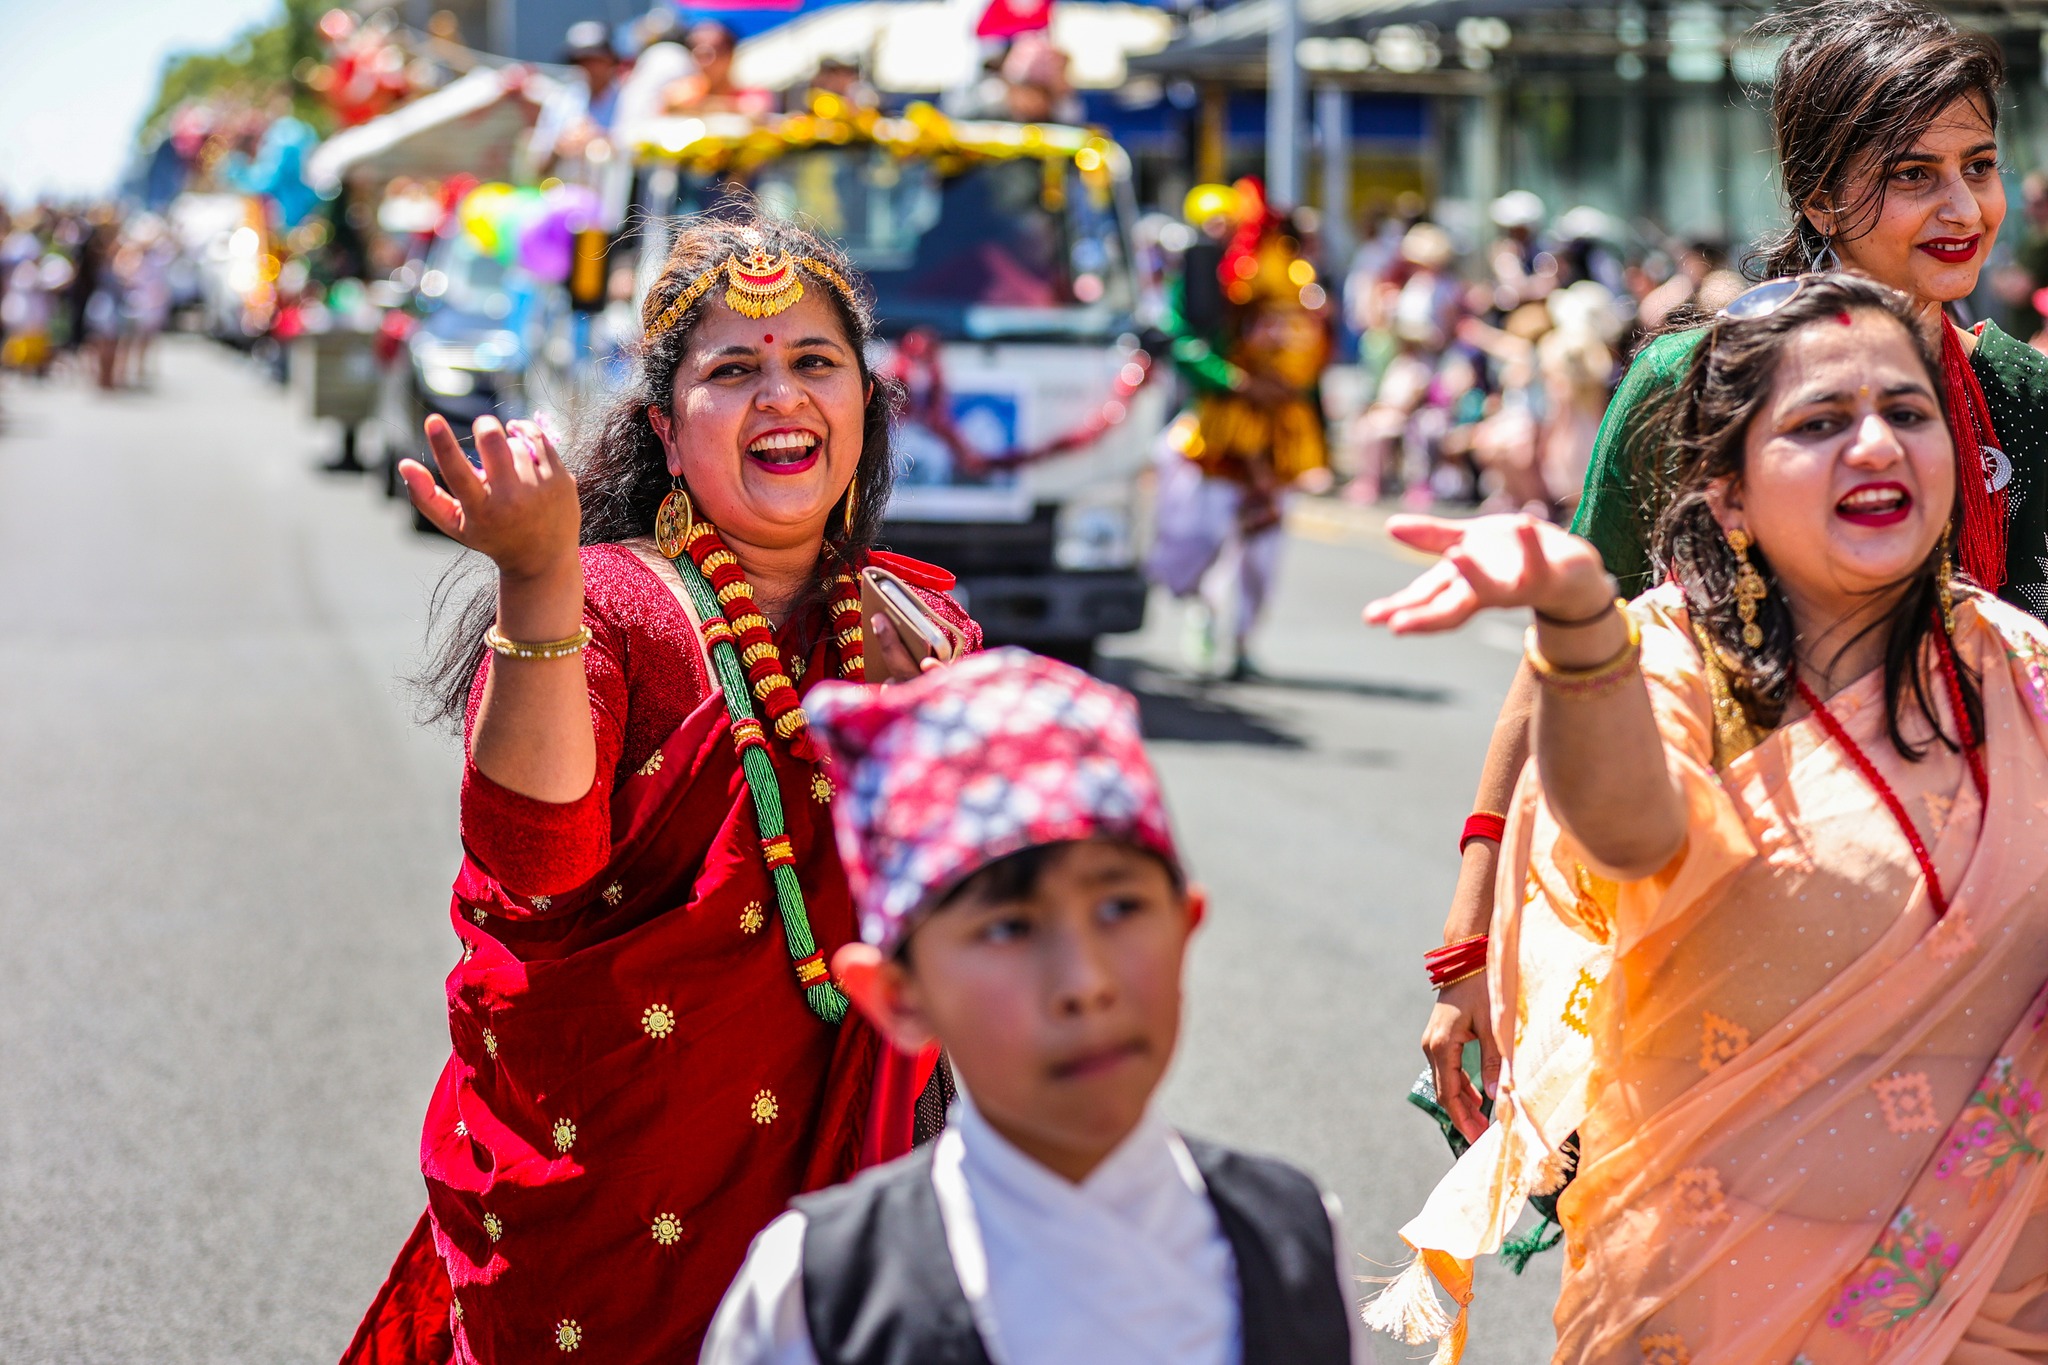 Indian women in colourful clothing dancing and smiling in the road with parade blurred in the background